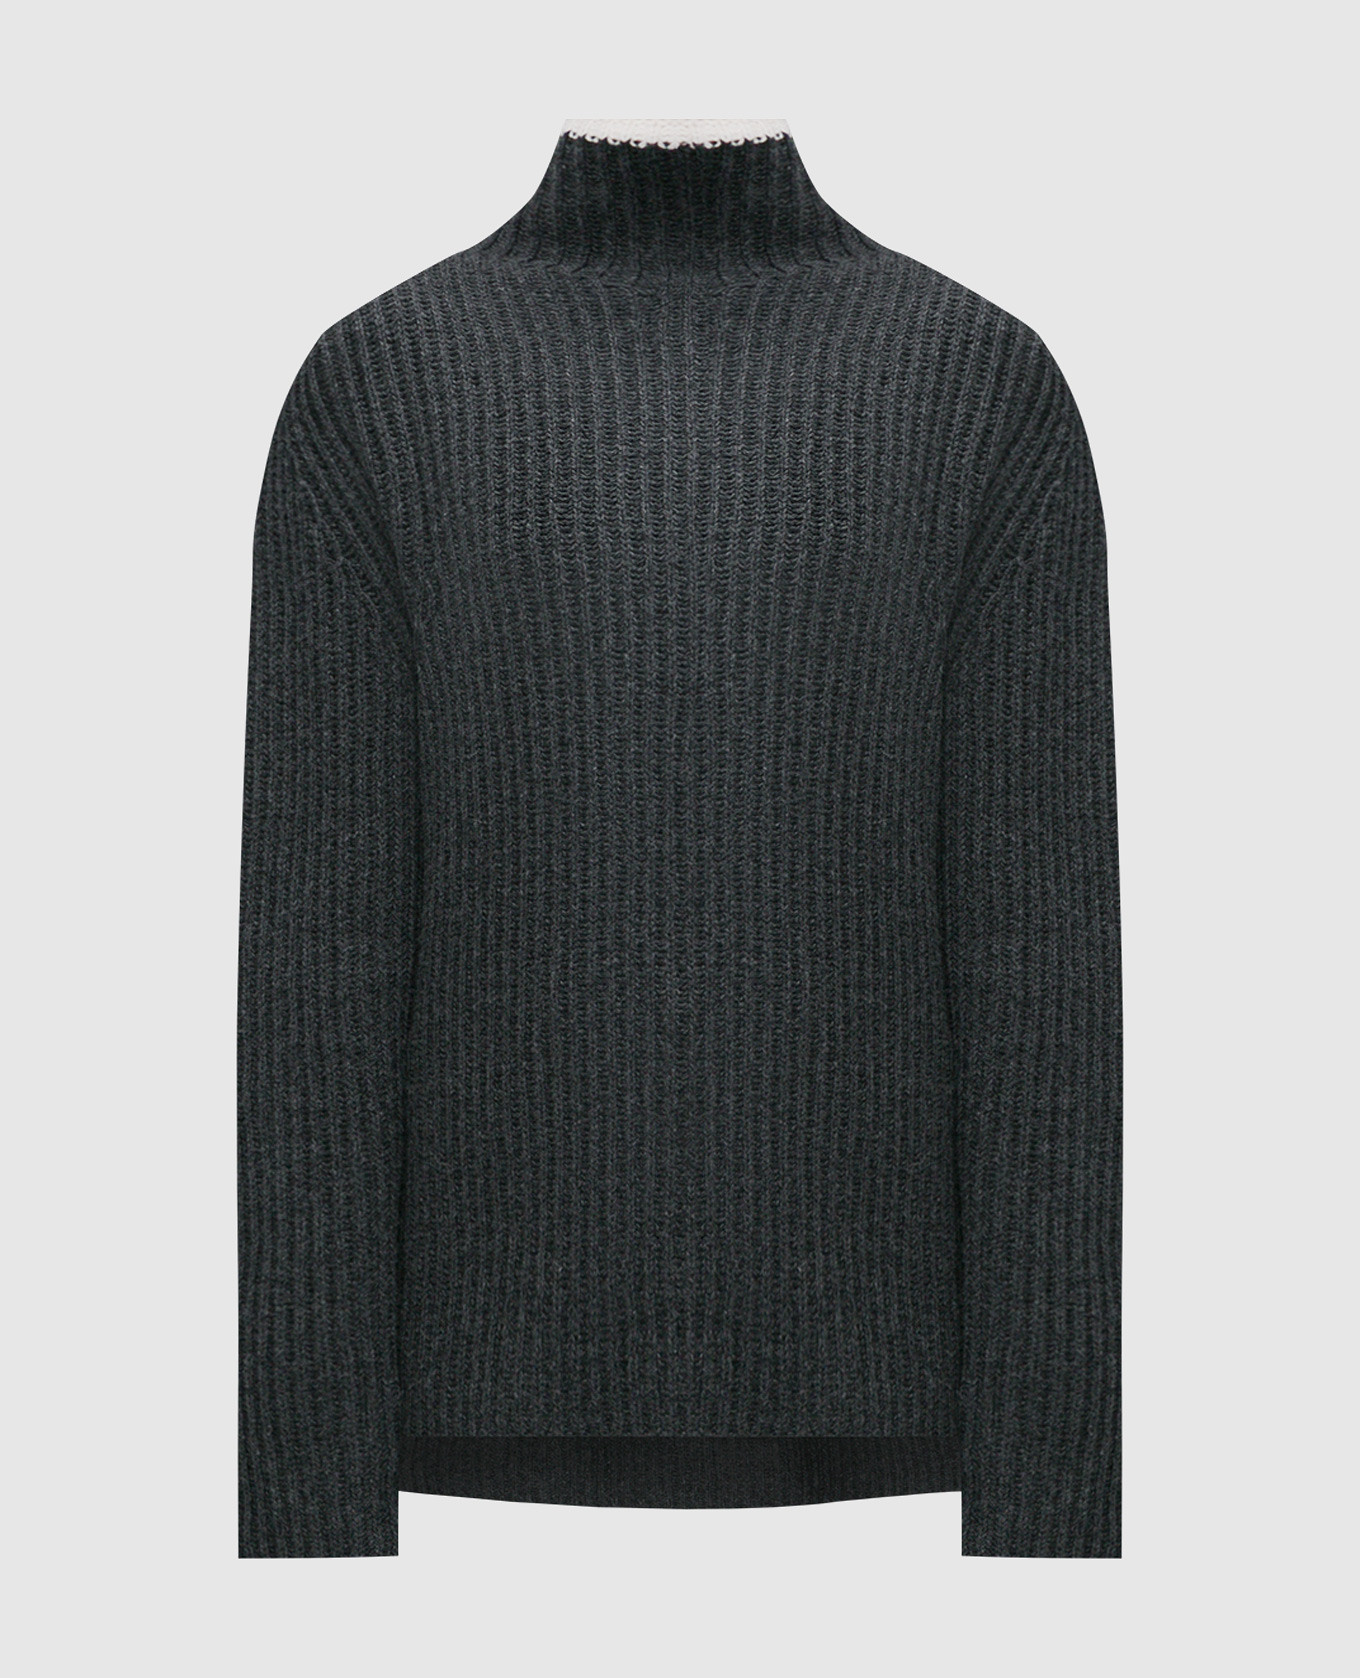 Black wool and cashmere sweater